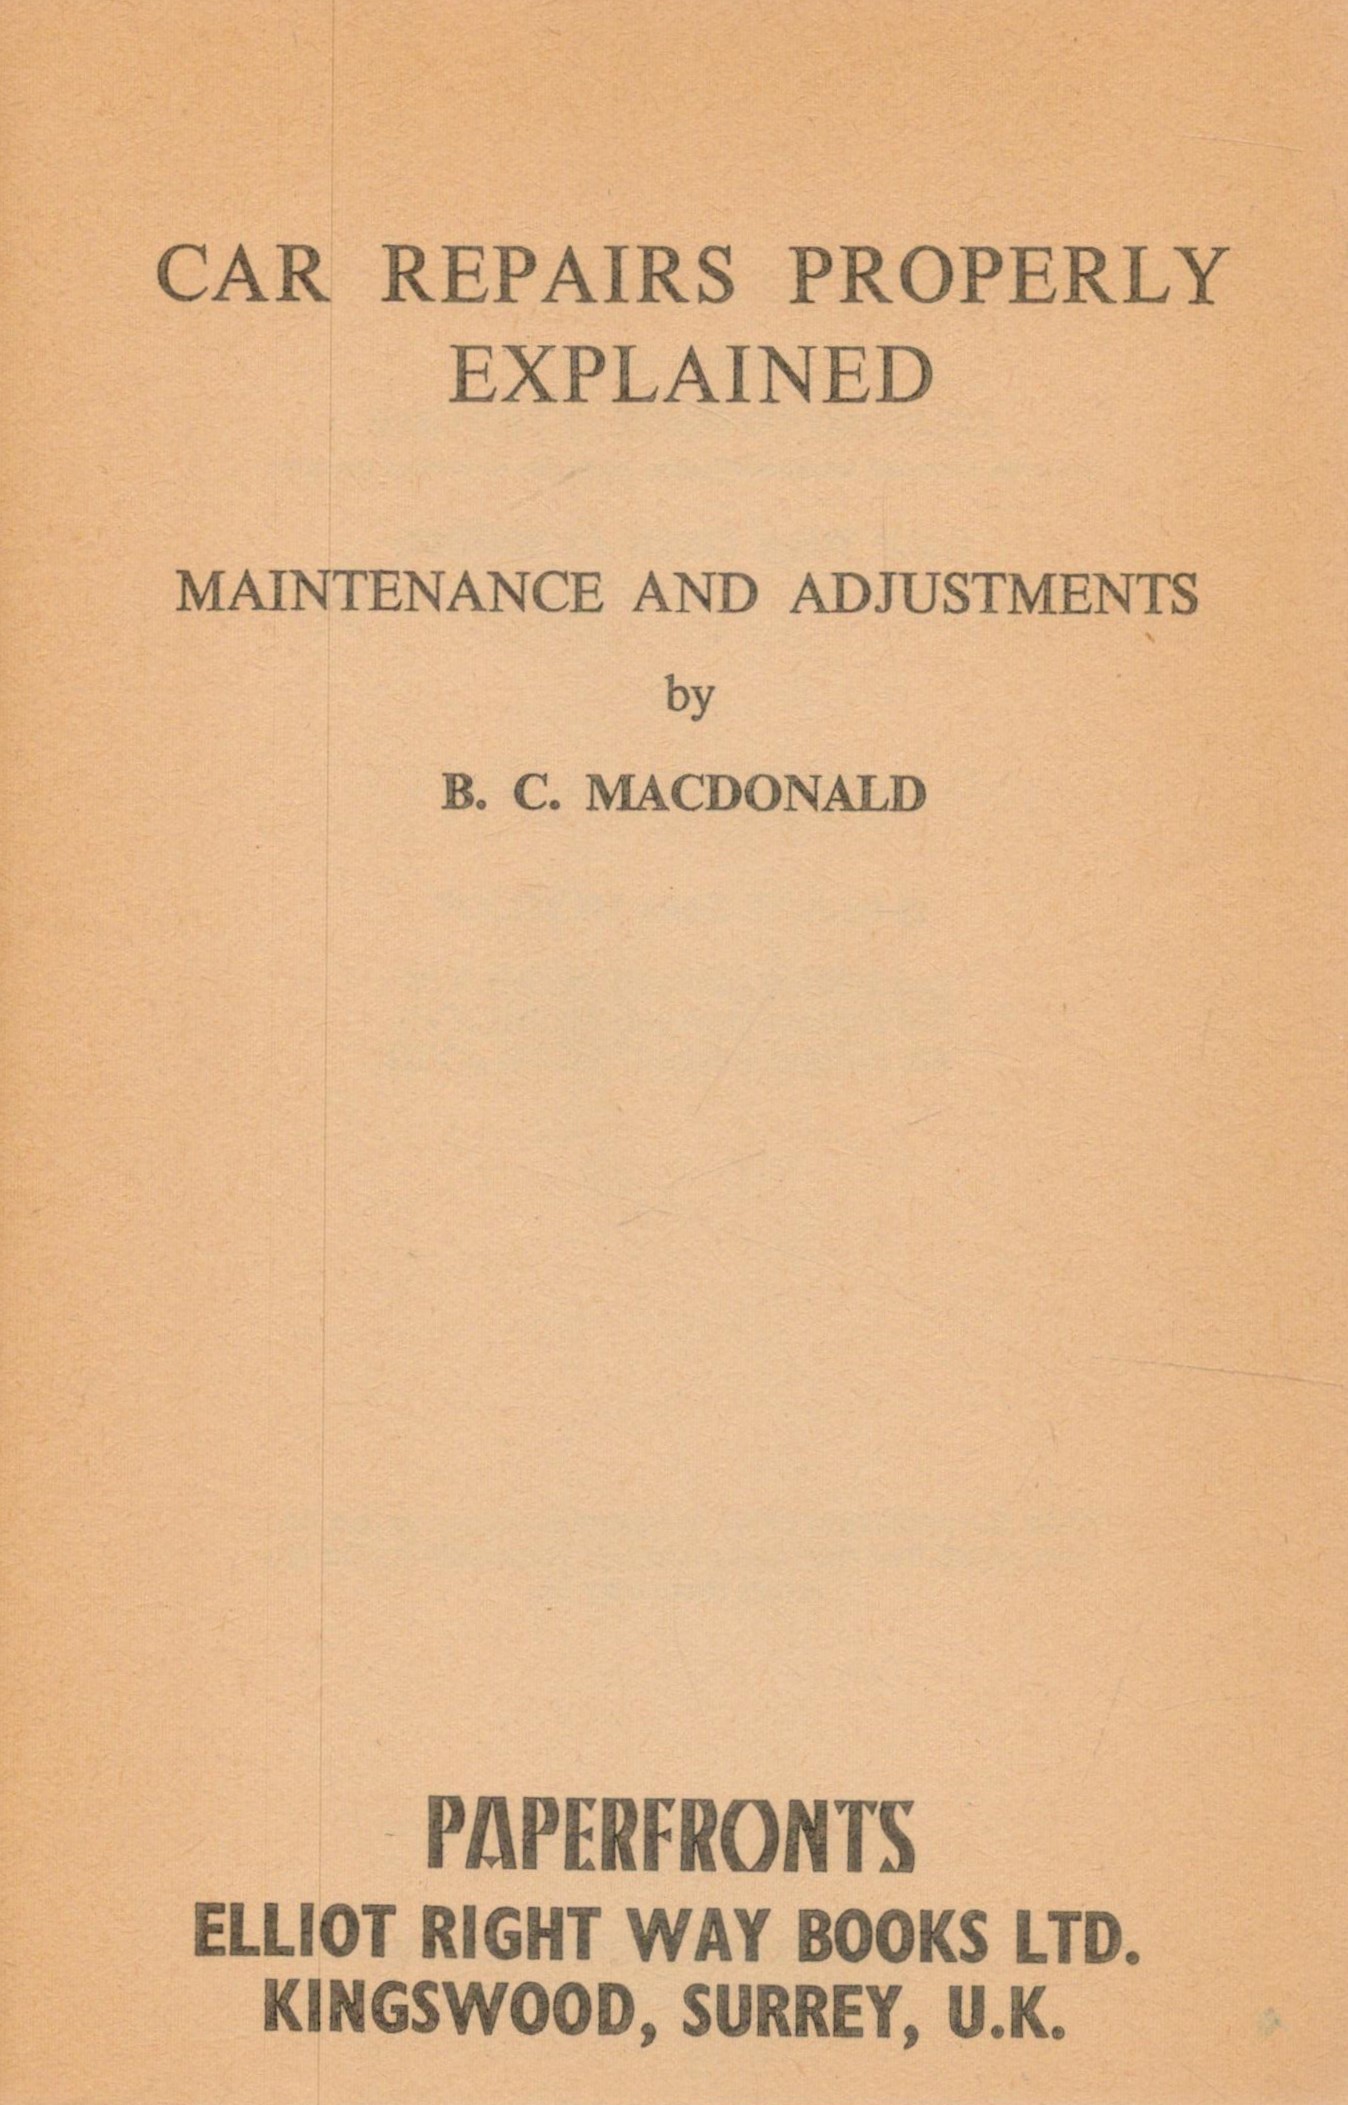 Car Repairs Properly Explained by B C Macdonald 1968 Fourth Edition Softback Book with 192 pages - Image 2 of 3